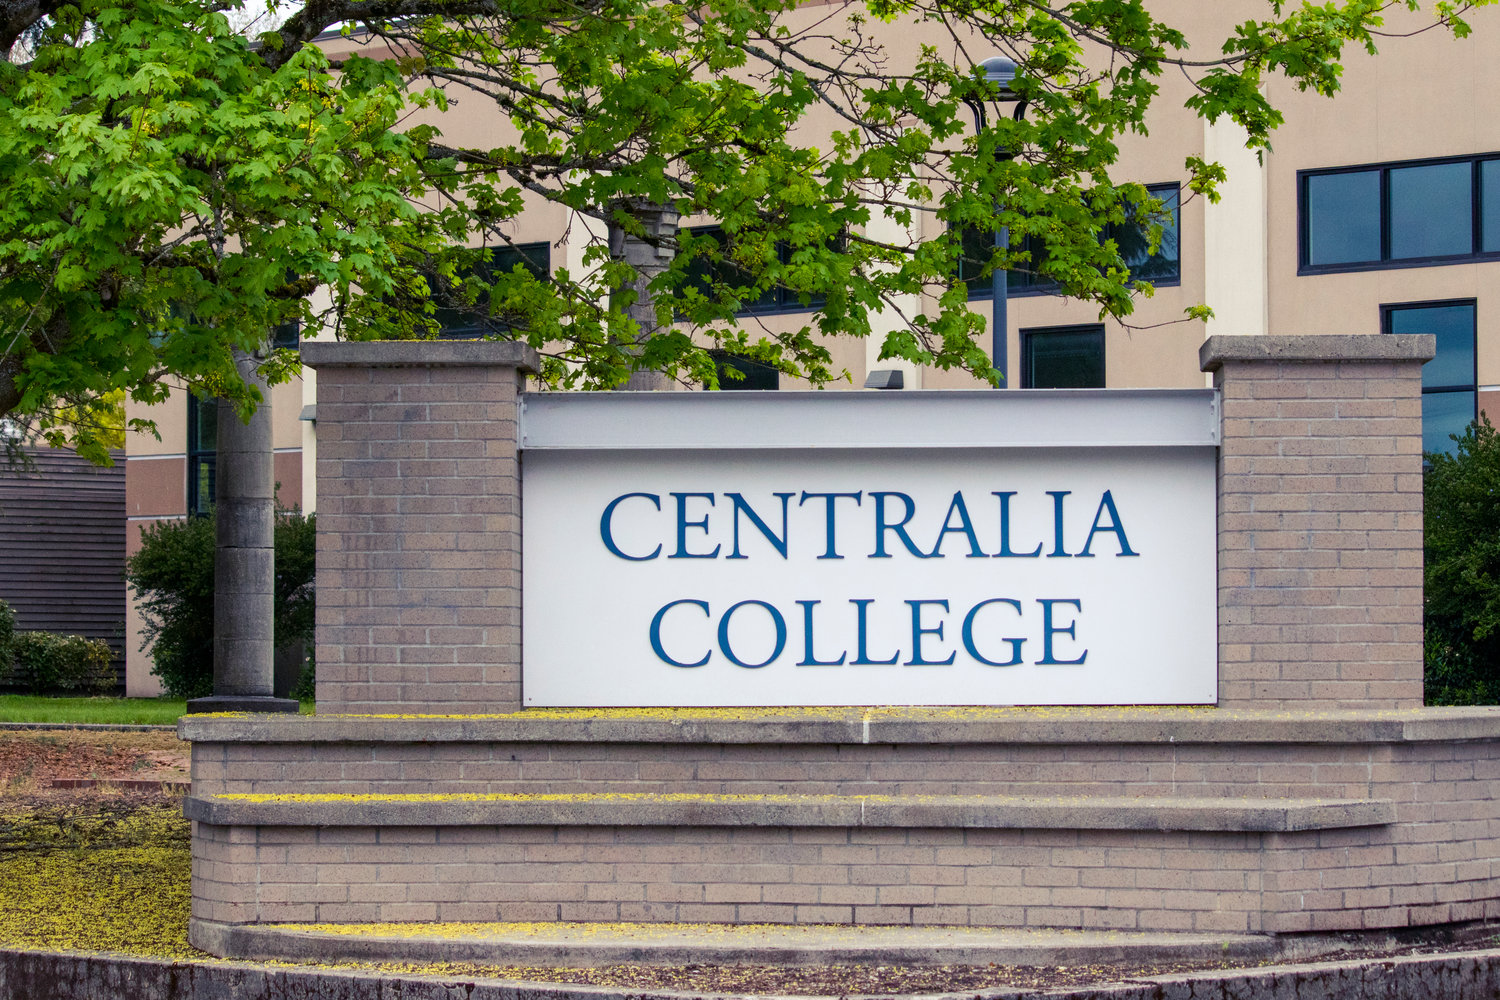 Pollen and tree debris collect on a Centralia College sign in this 2021 Chronicle file photo.